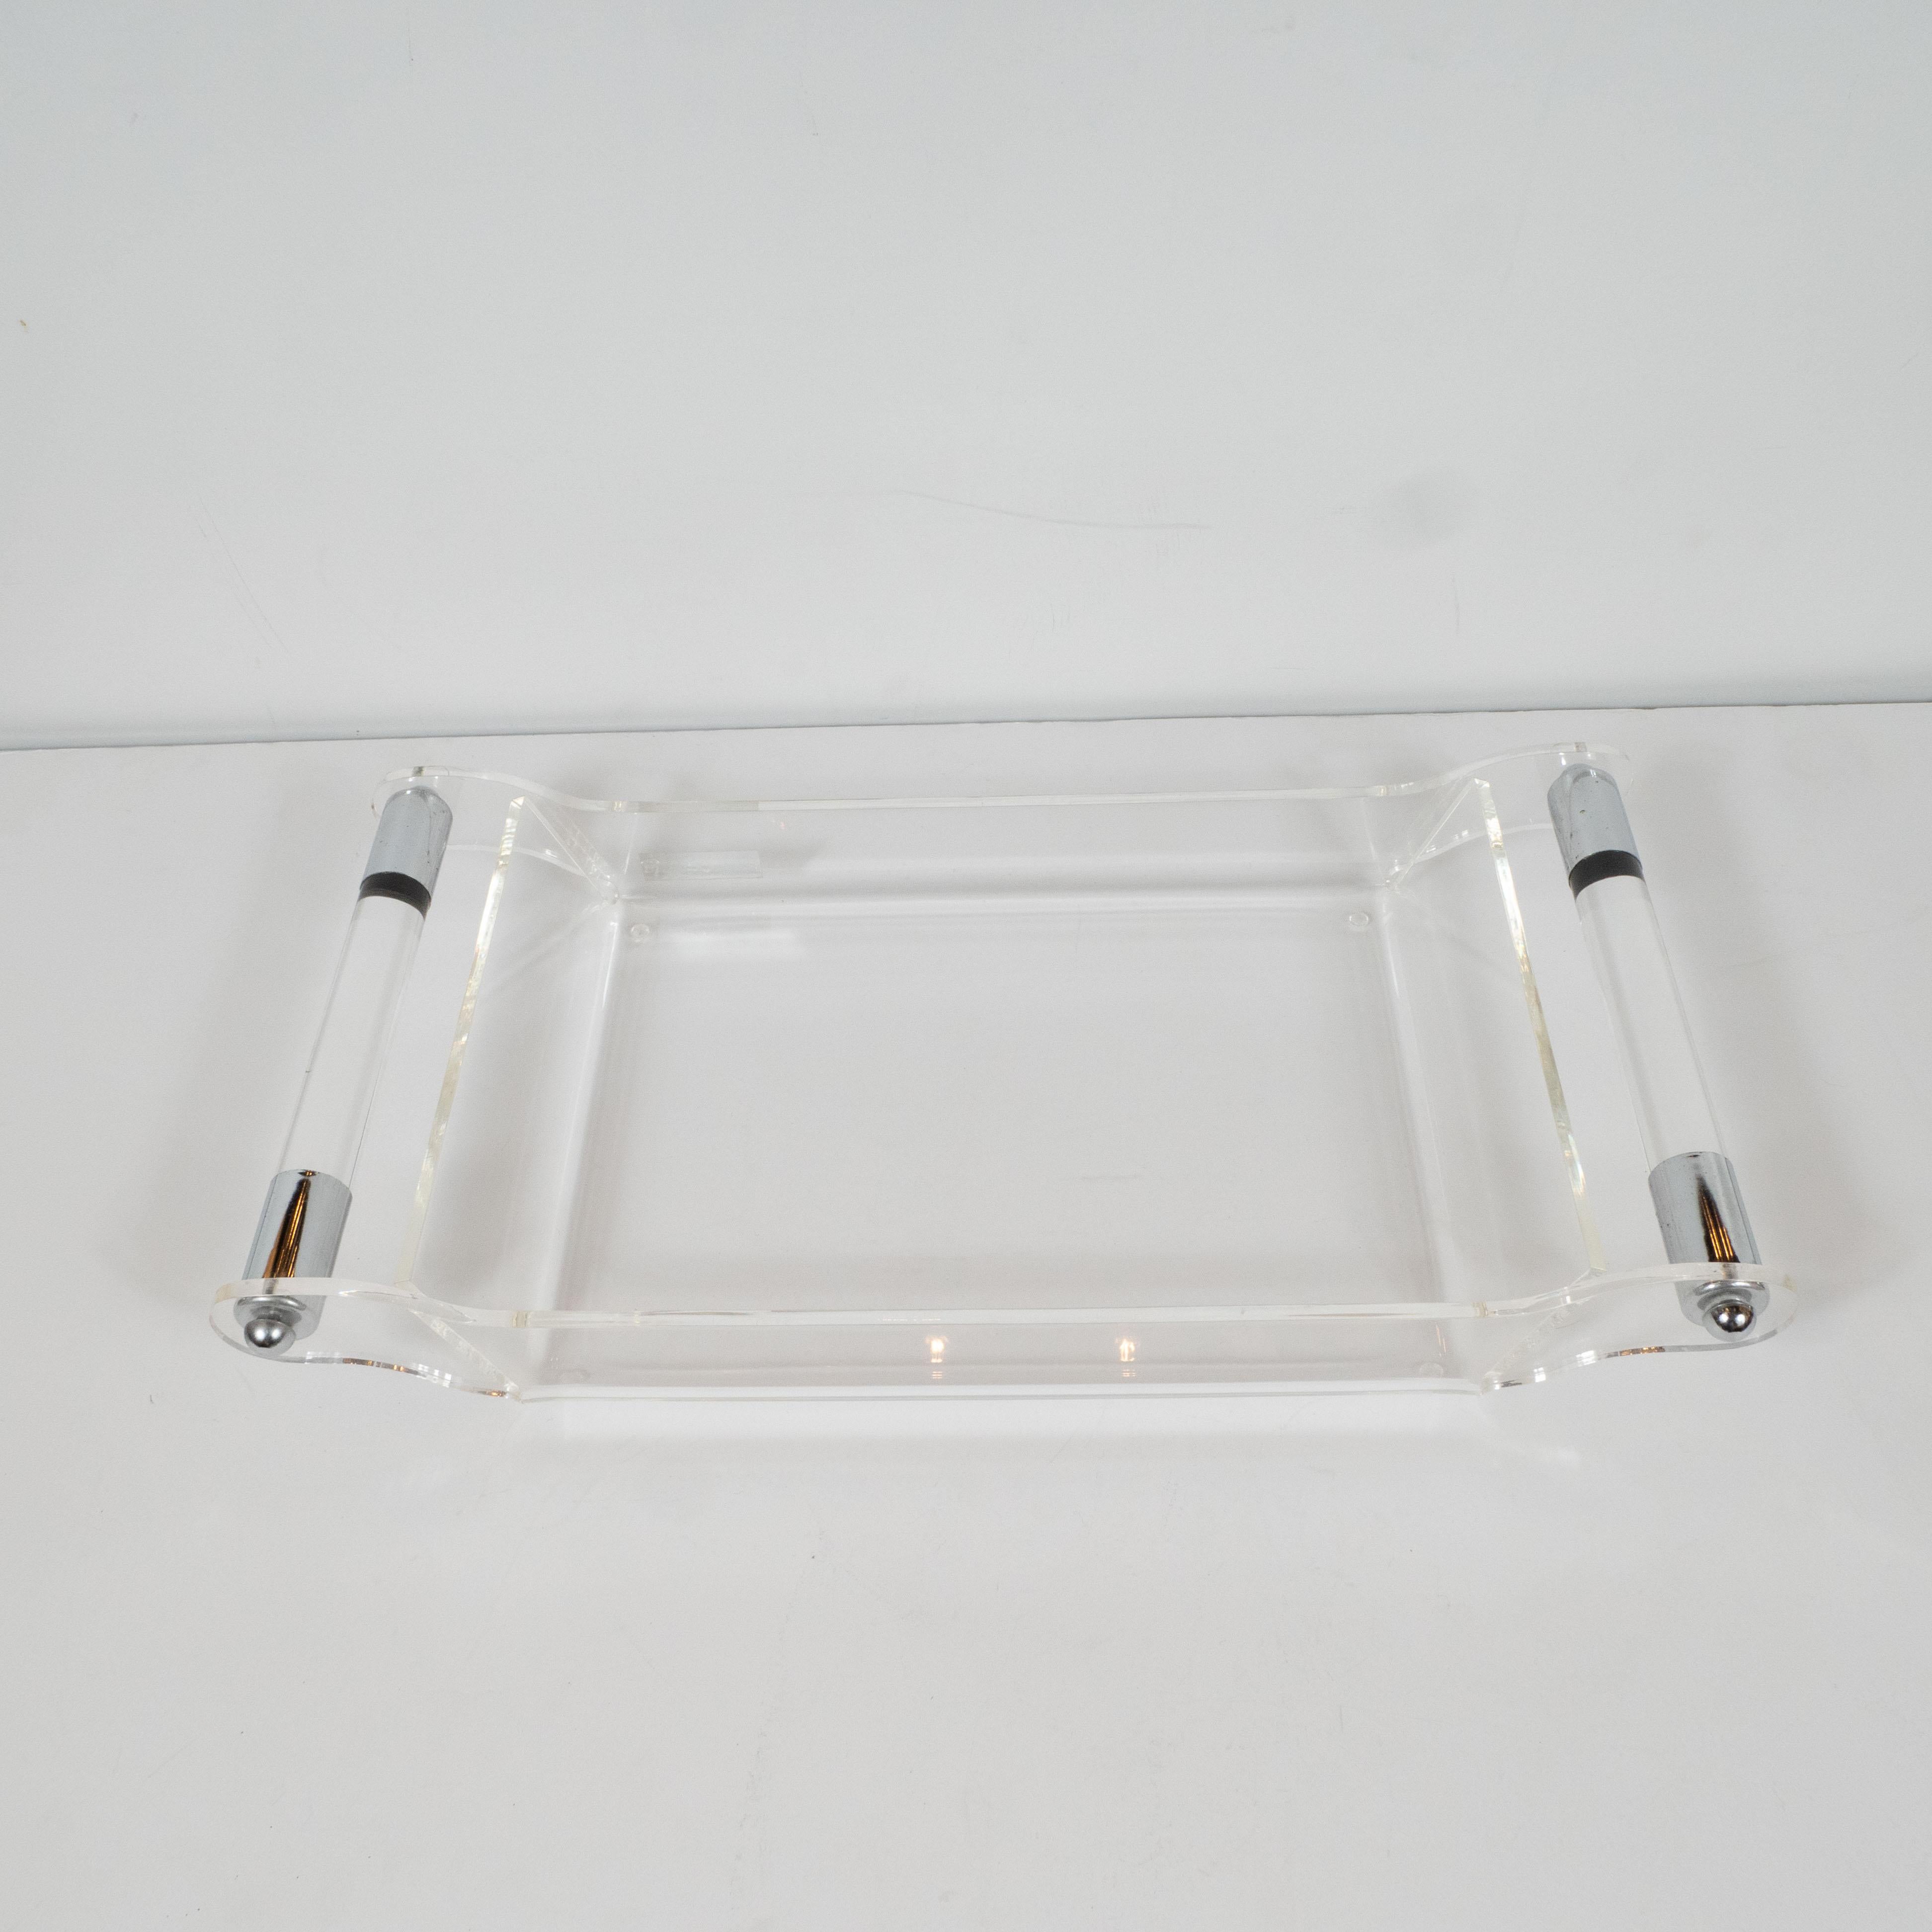 American Mid-Century Modern Lucite Tray with Chrome Fittings by Product Makers